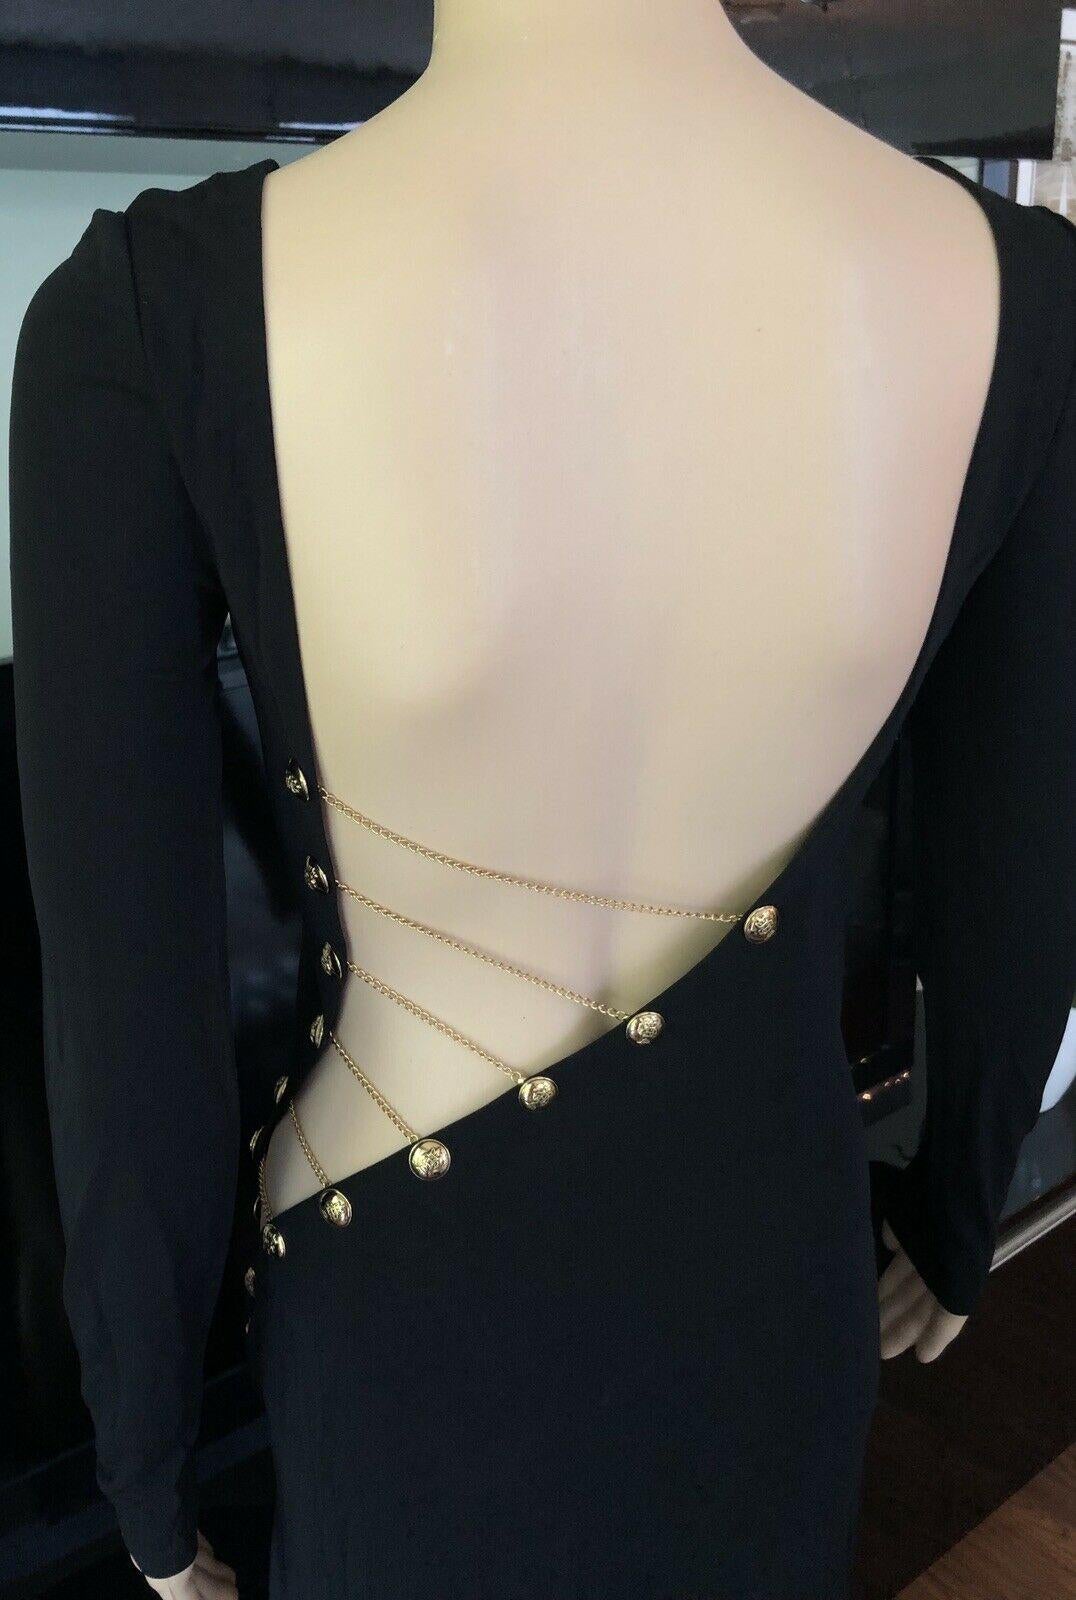 Emilio Pucci Chain Embellished Cutout Open Back Black Evening Dress Gown

Black Emilio Pucci long sleeve cutout evening dress with open back featuring gold-tone chain-link accents and side slit. Please note fabric and size tags have been removed-